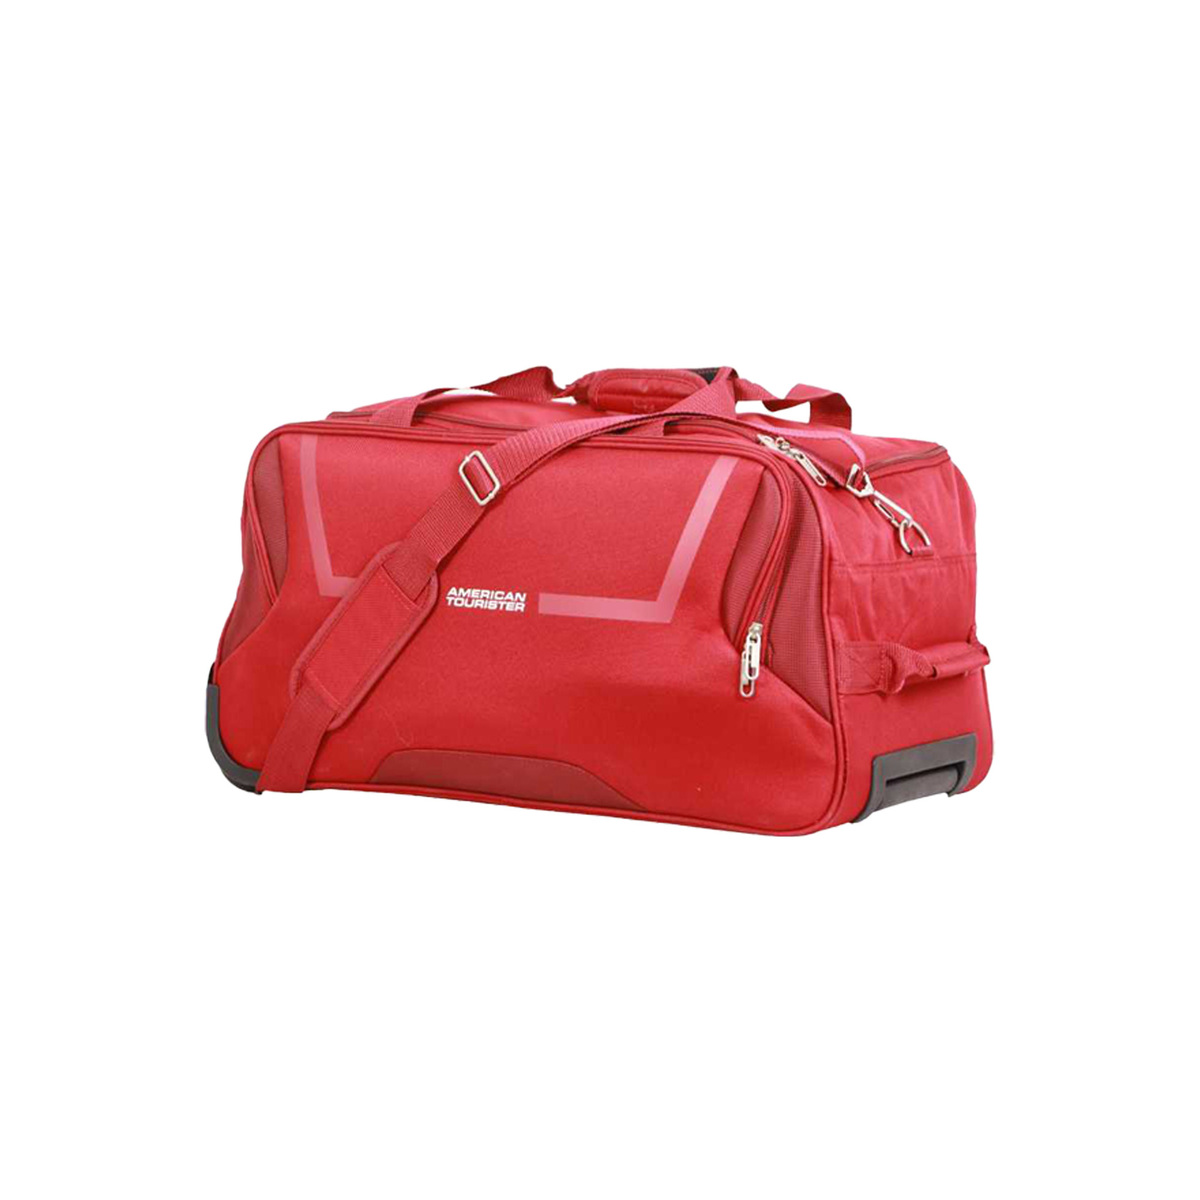 American Tourister Cosmo Duffle Bag , 67 cm, Red